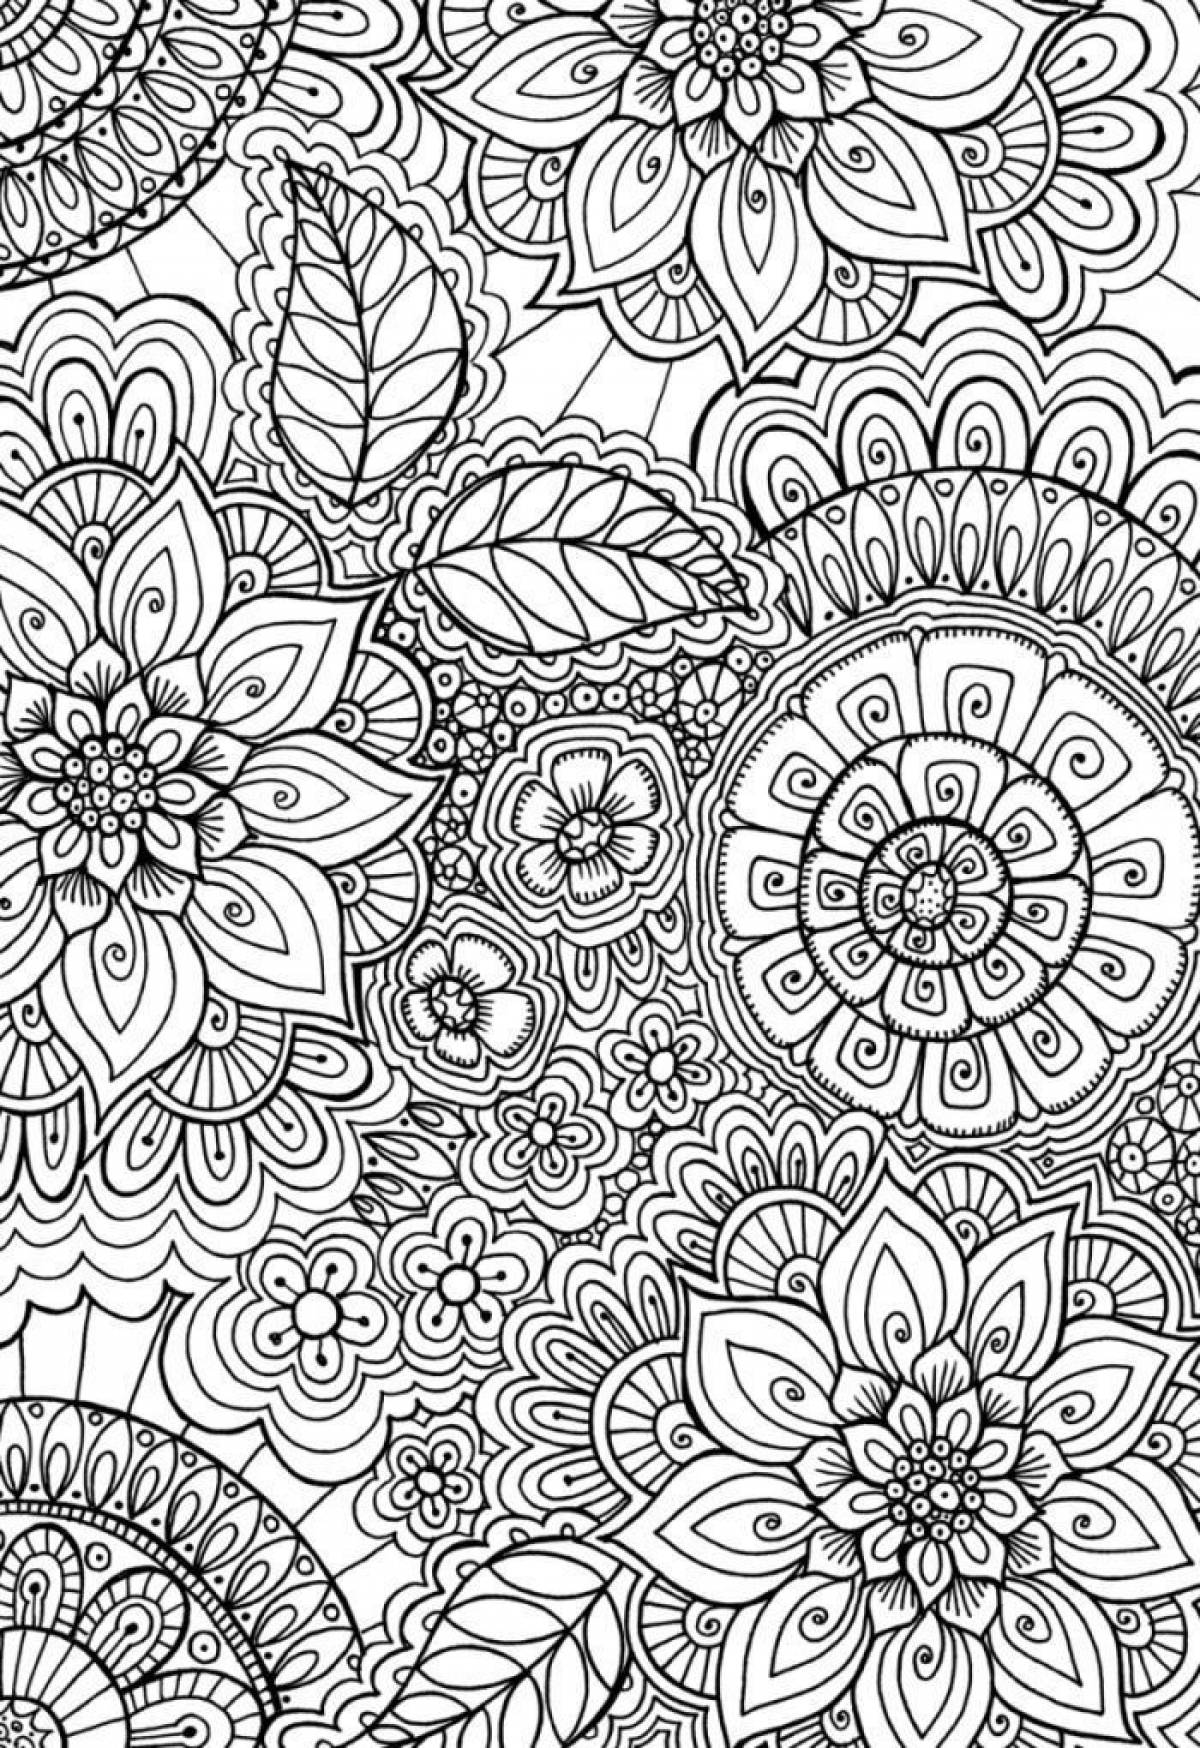 Coloring book art therapy